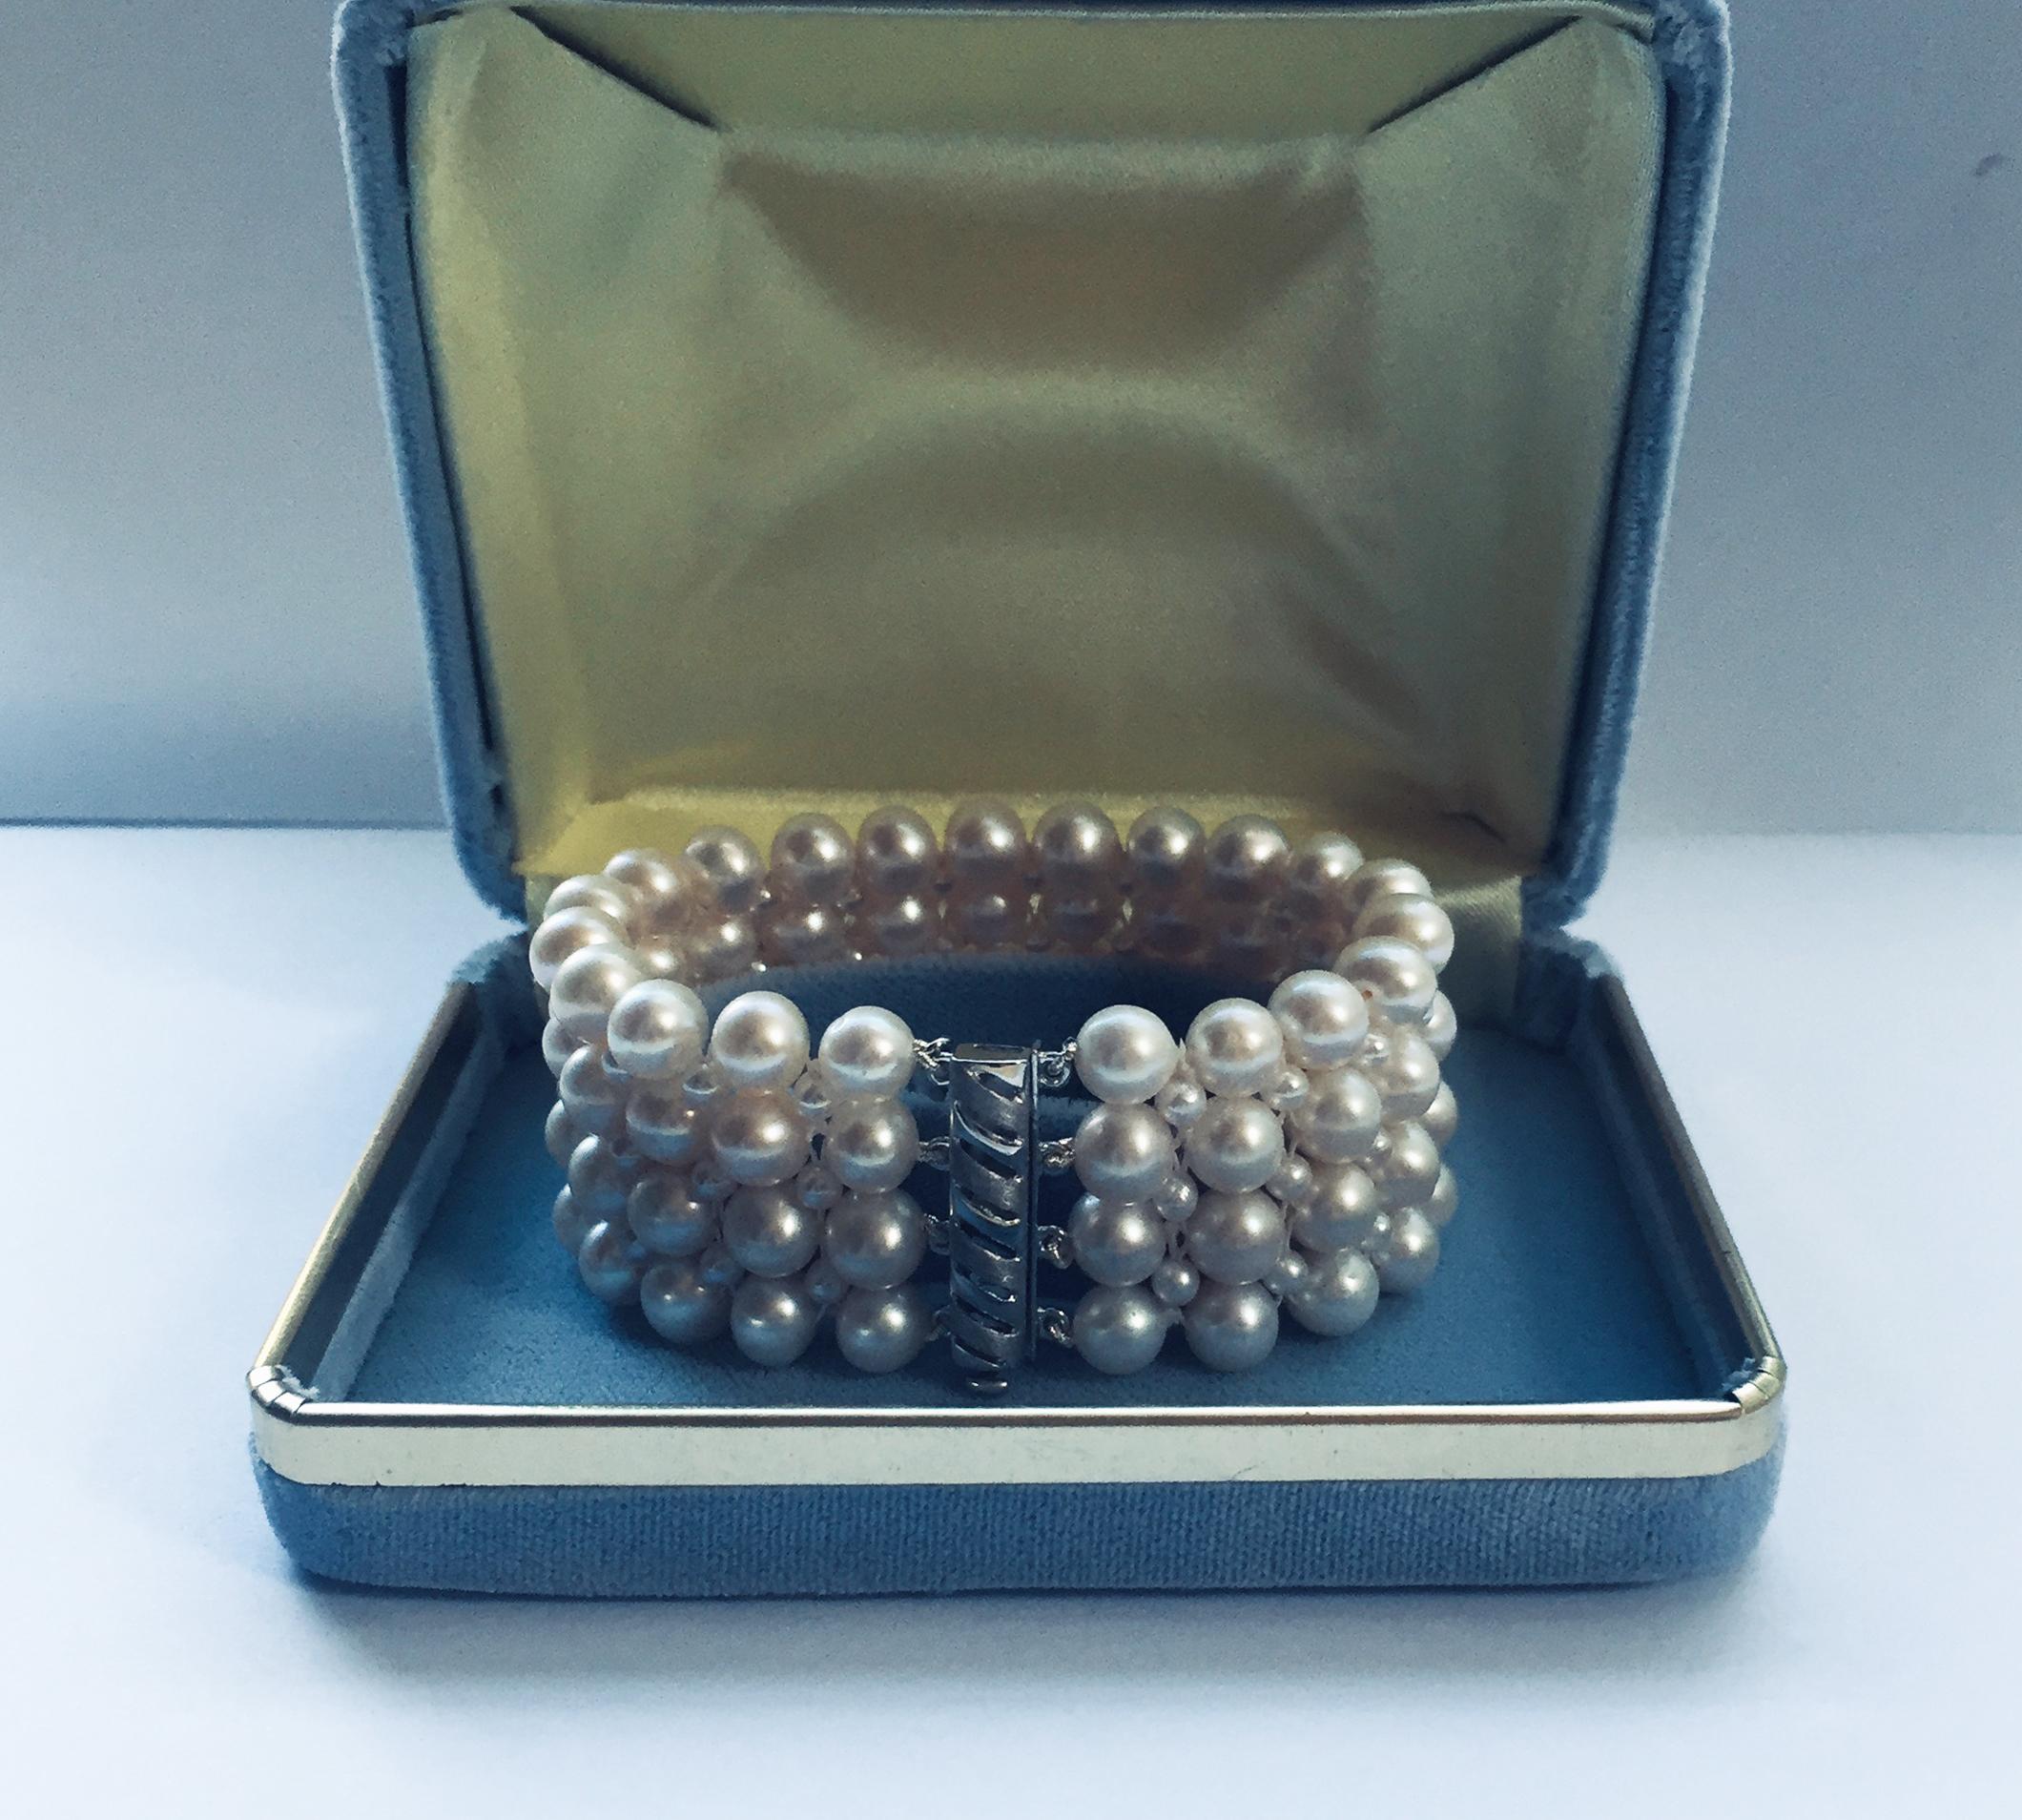 Marina J. Hand-Woven Pearl Bracelet with 14 Karat White Gold Plated Clasp 3